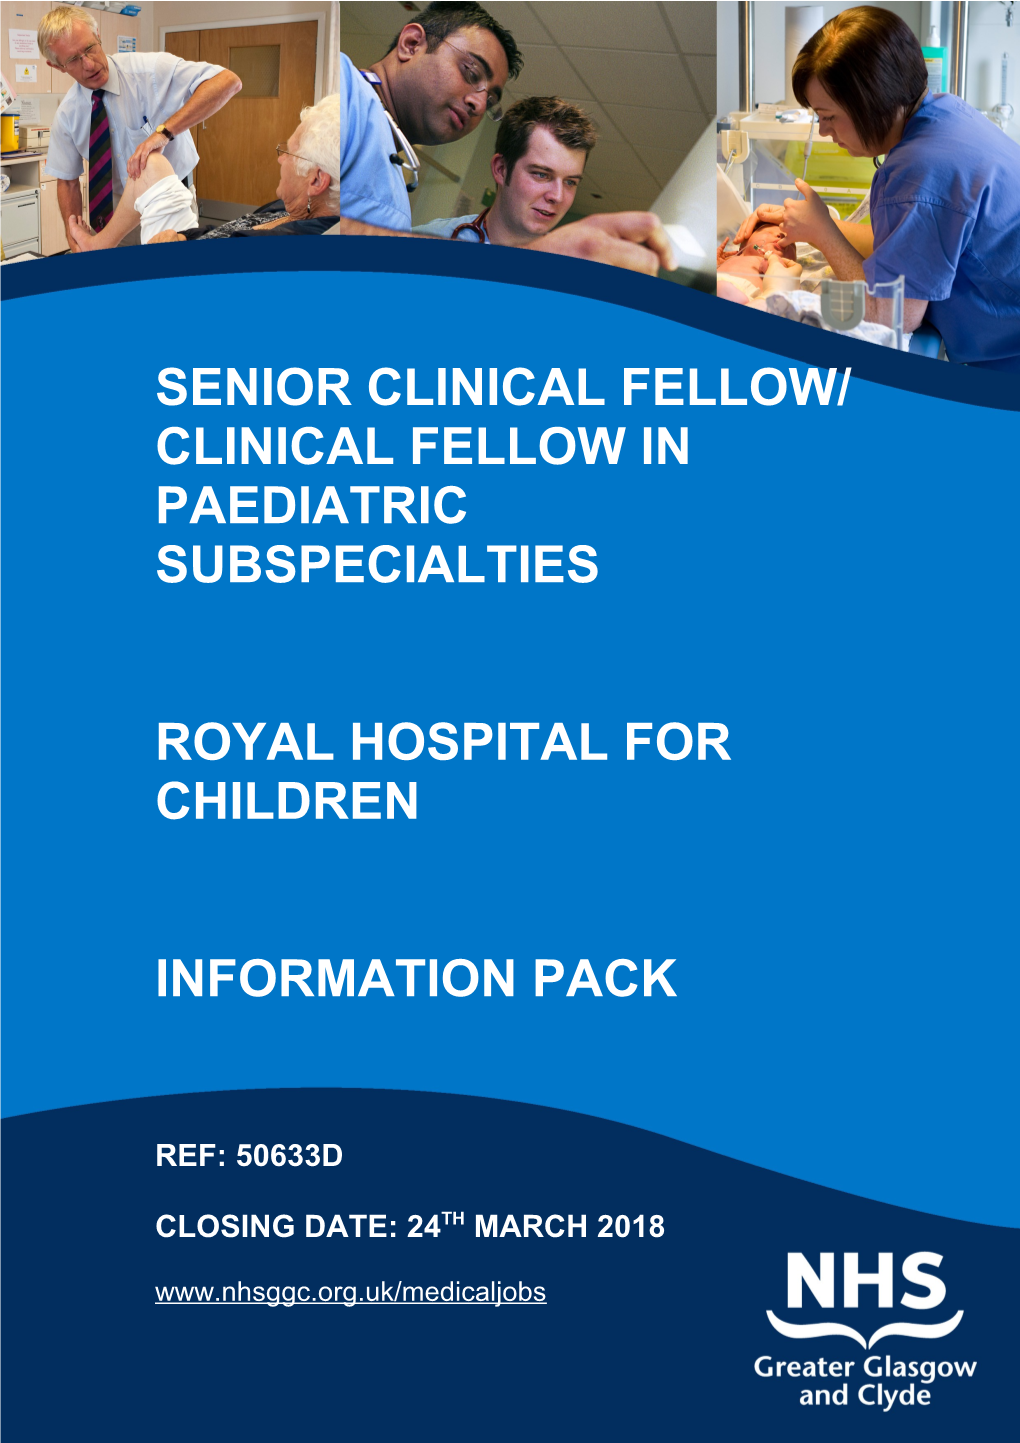 Senior Clinical Fellow/Clinical Fellow in Paediatric Subspecialties